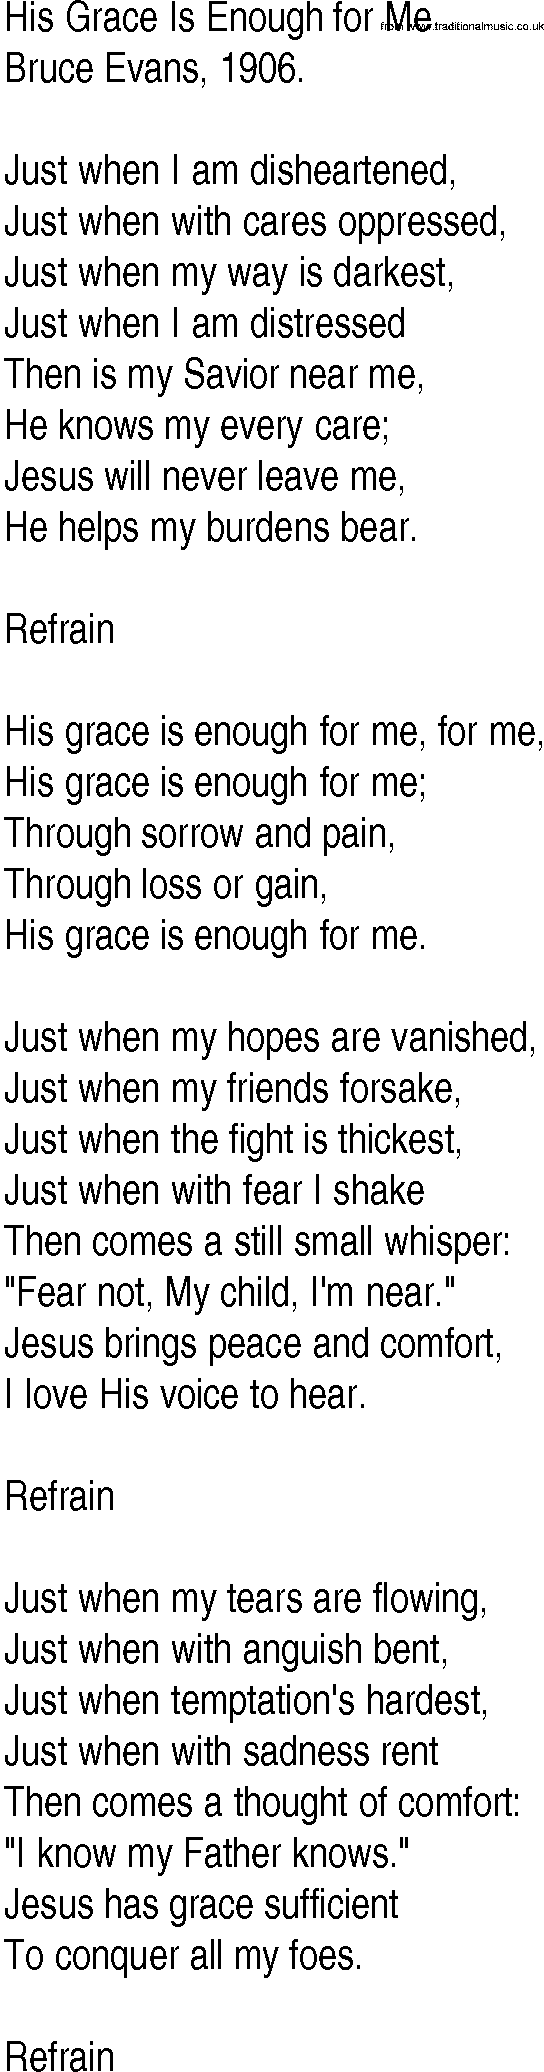 Hymn and Gospel Song: His Grace Is Enough for Me by Bruce Evans lyrics